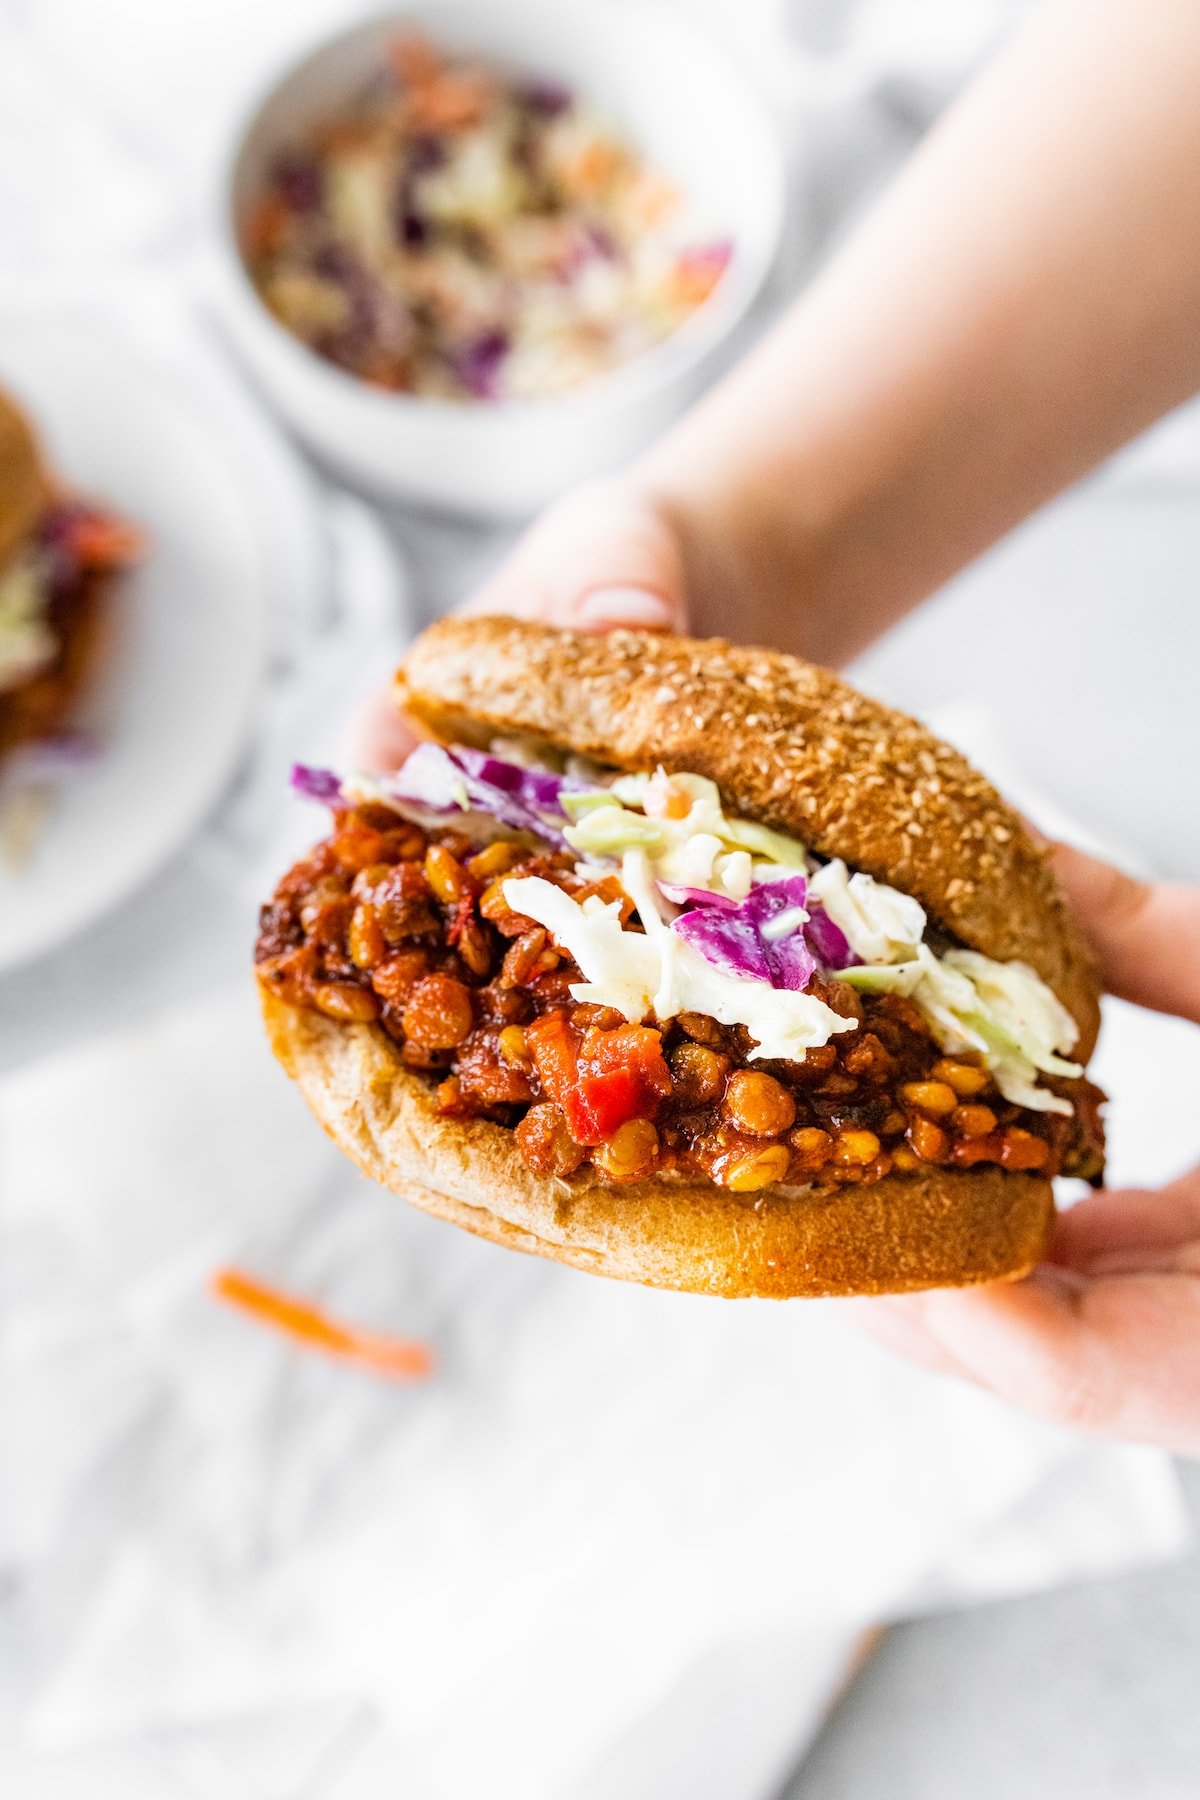 Woman's hand holding a vegan Sloppy Joe on a whole wheat bun topped with coleslaw.